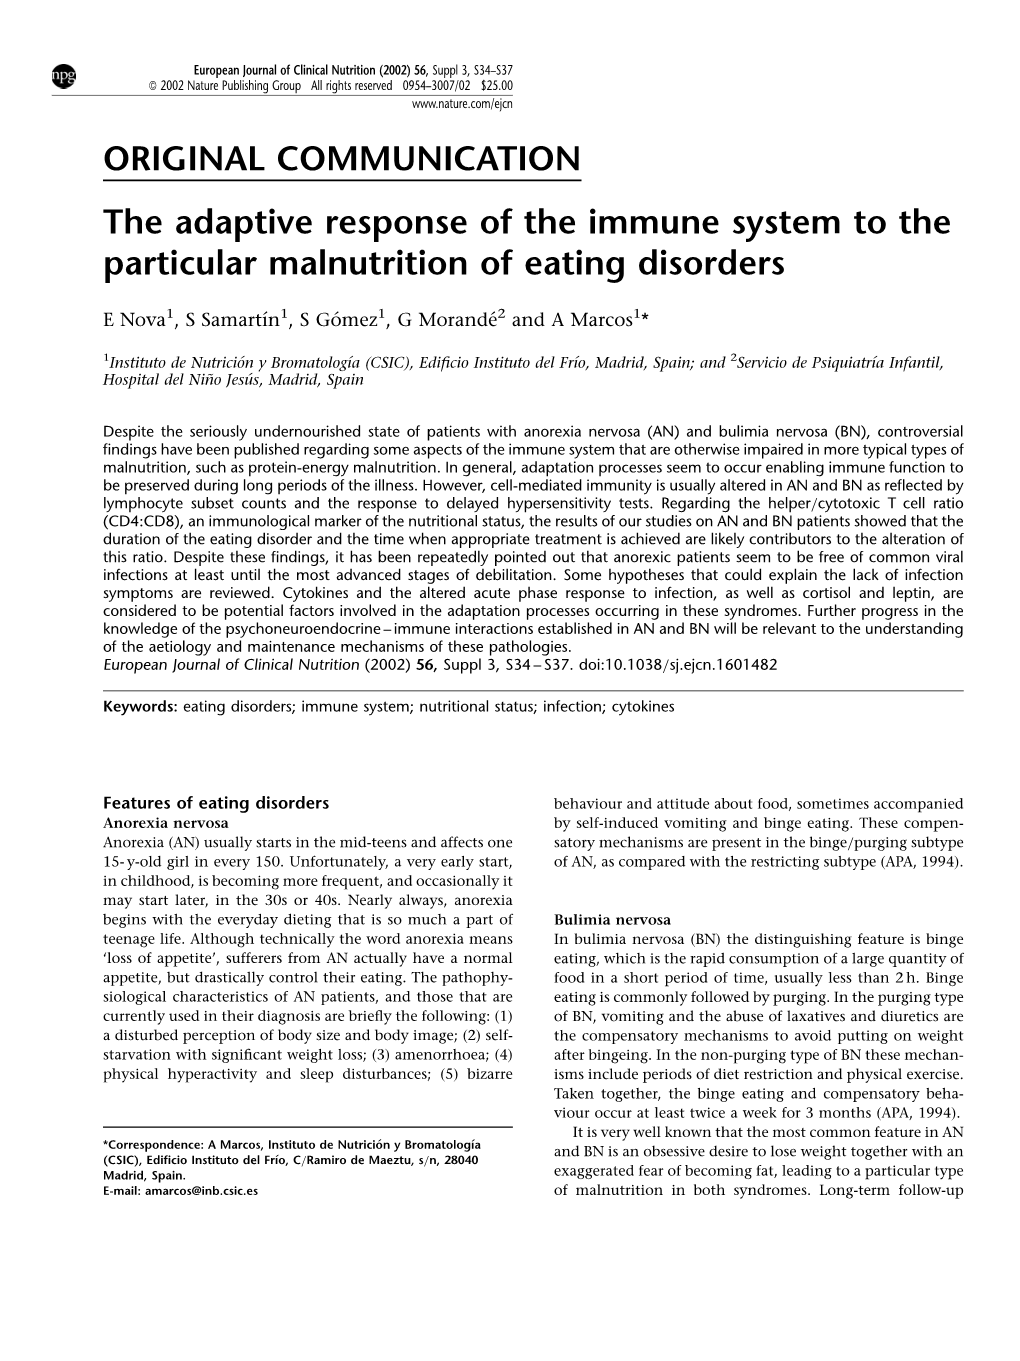 The Adaptive Response of the Immune System to the Particular Malnutrition of Eating Disorders